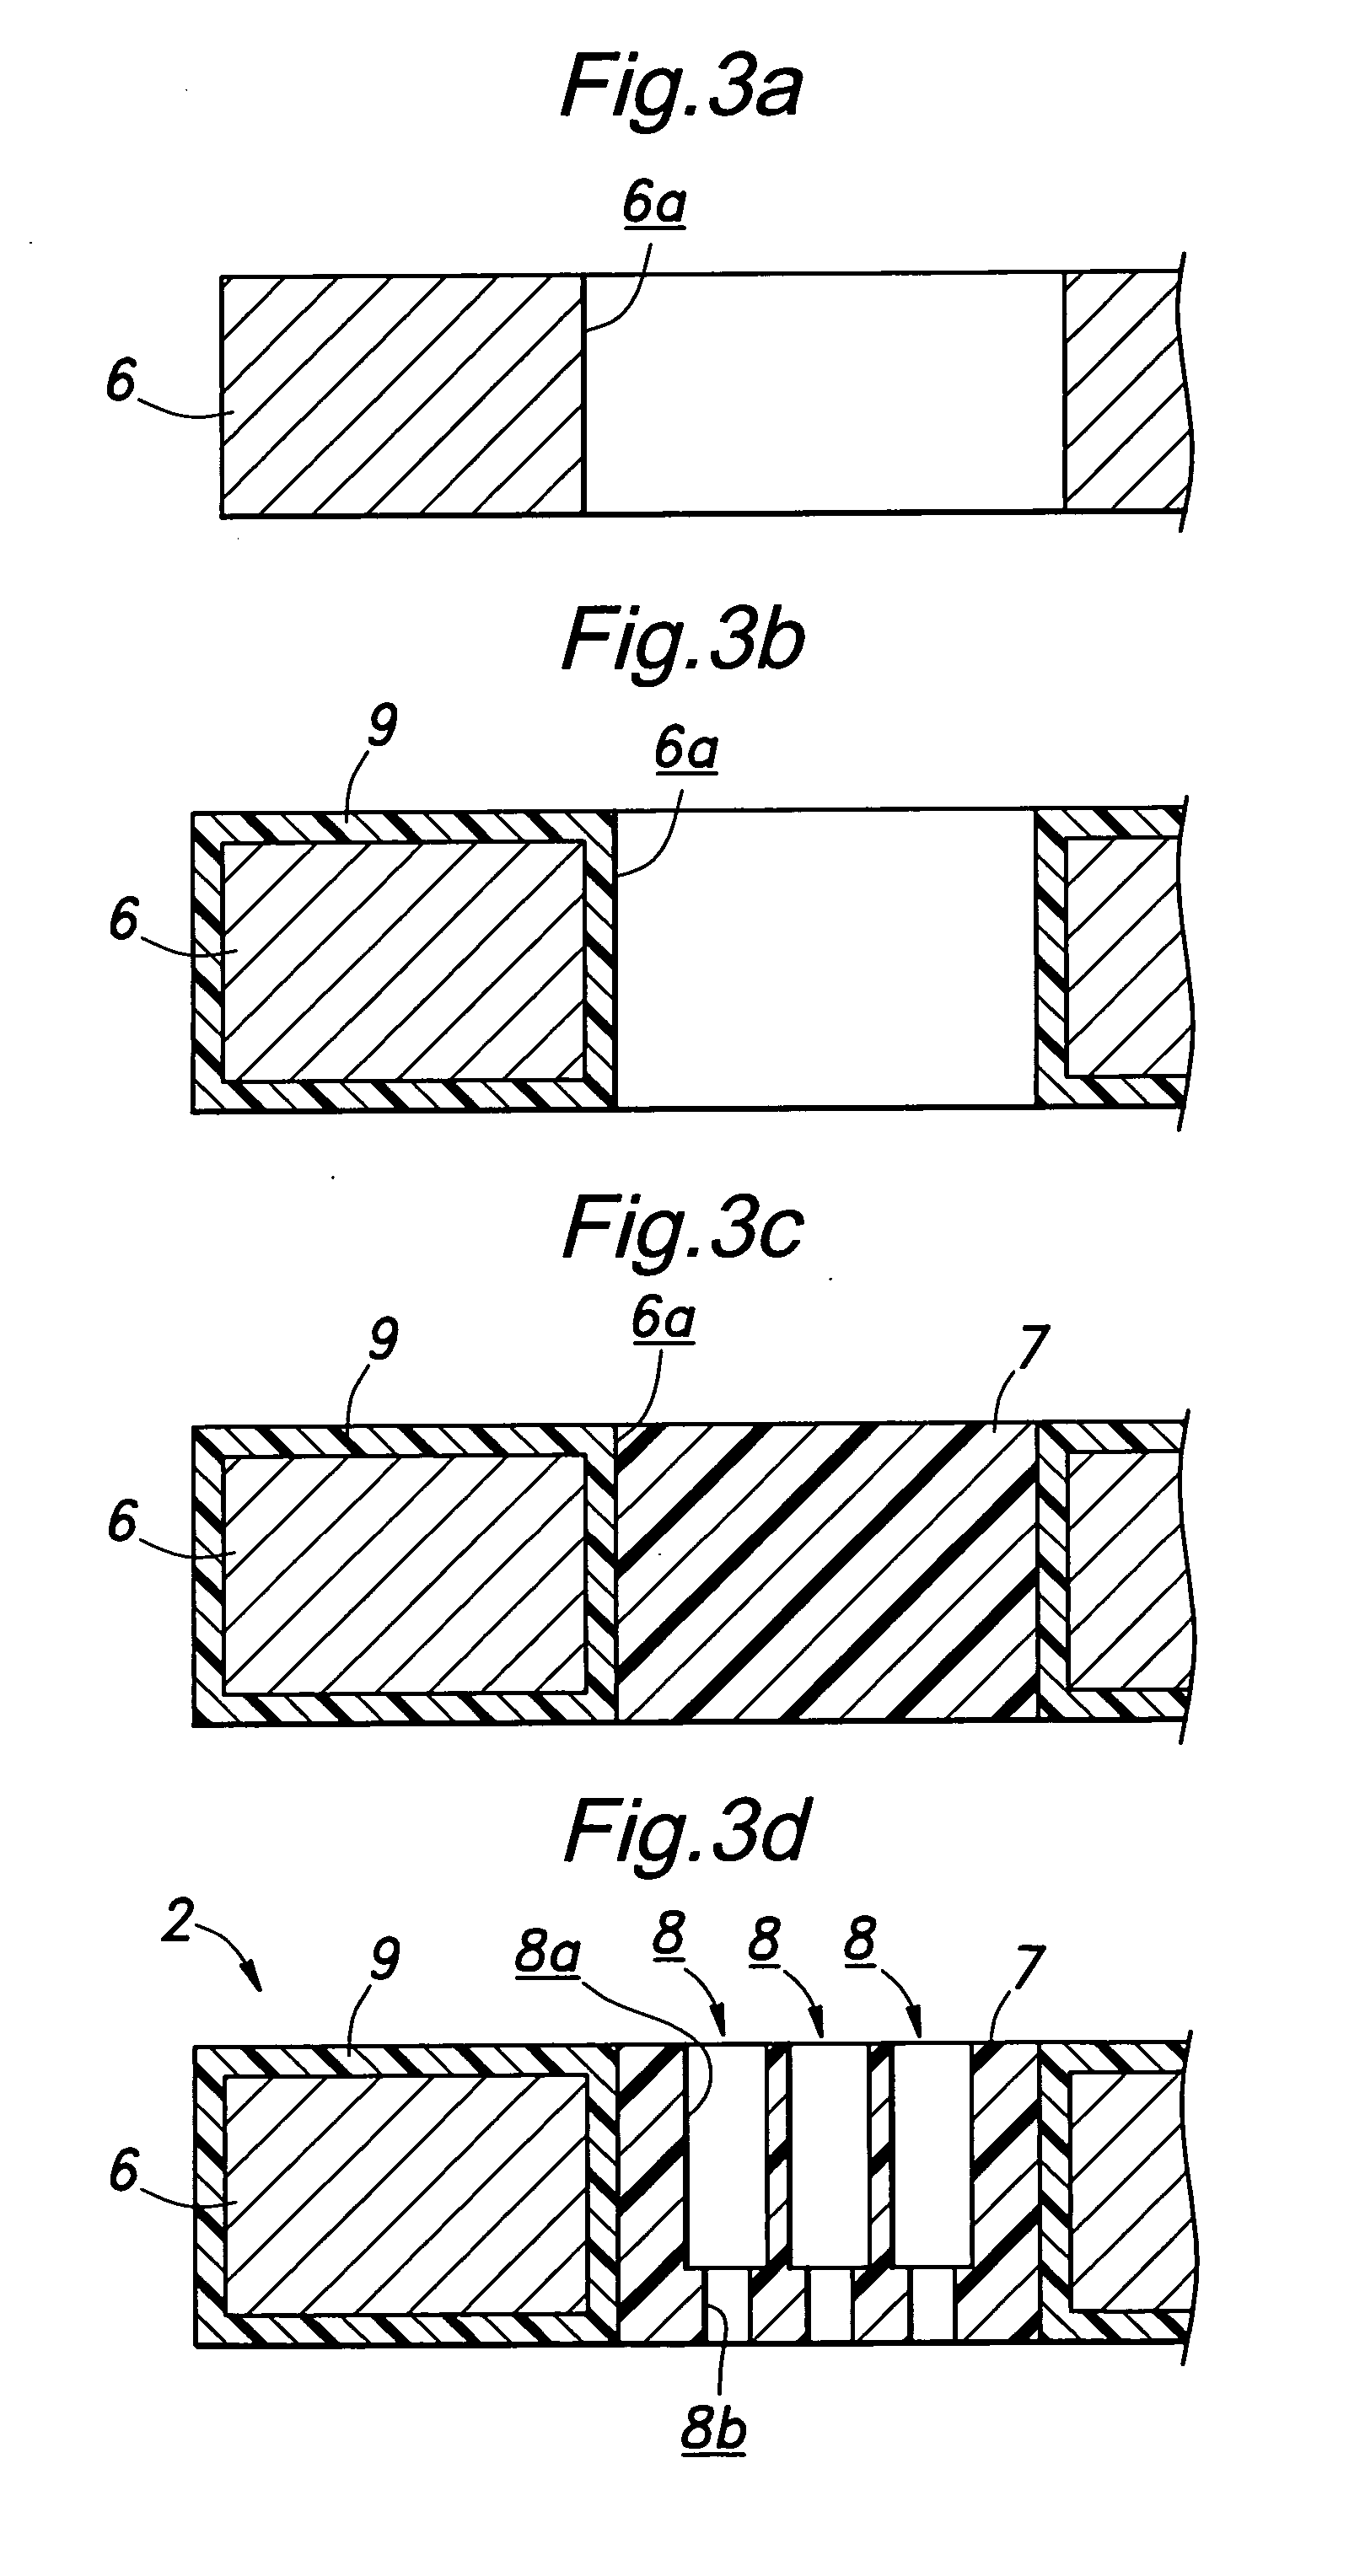 Holder for conductive contact